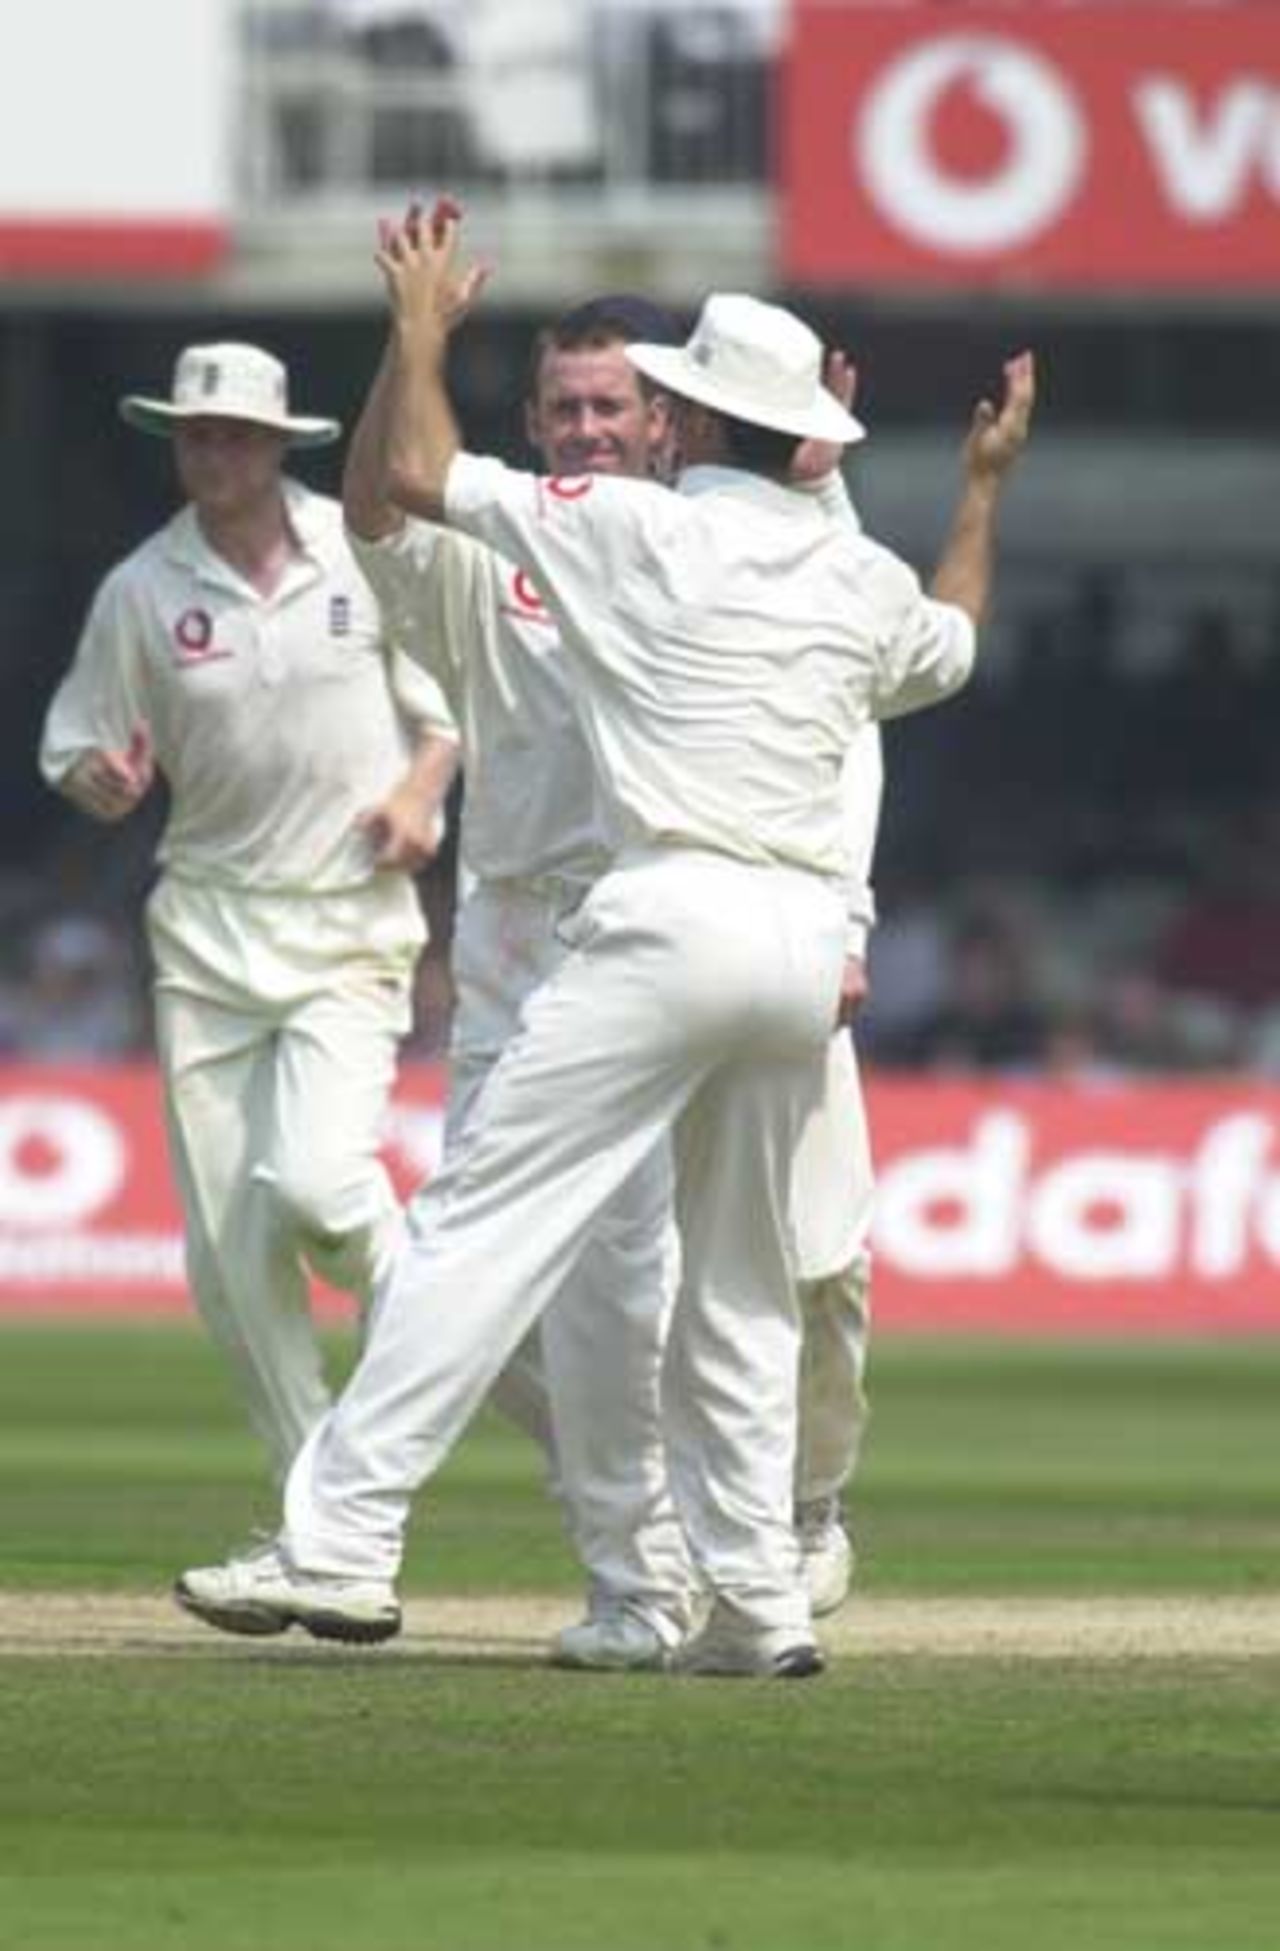 Joy for Craig White as he has Nehra out and the match is over, England v India 1st npower Test at Lord's